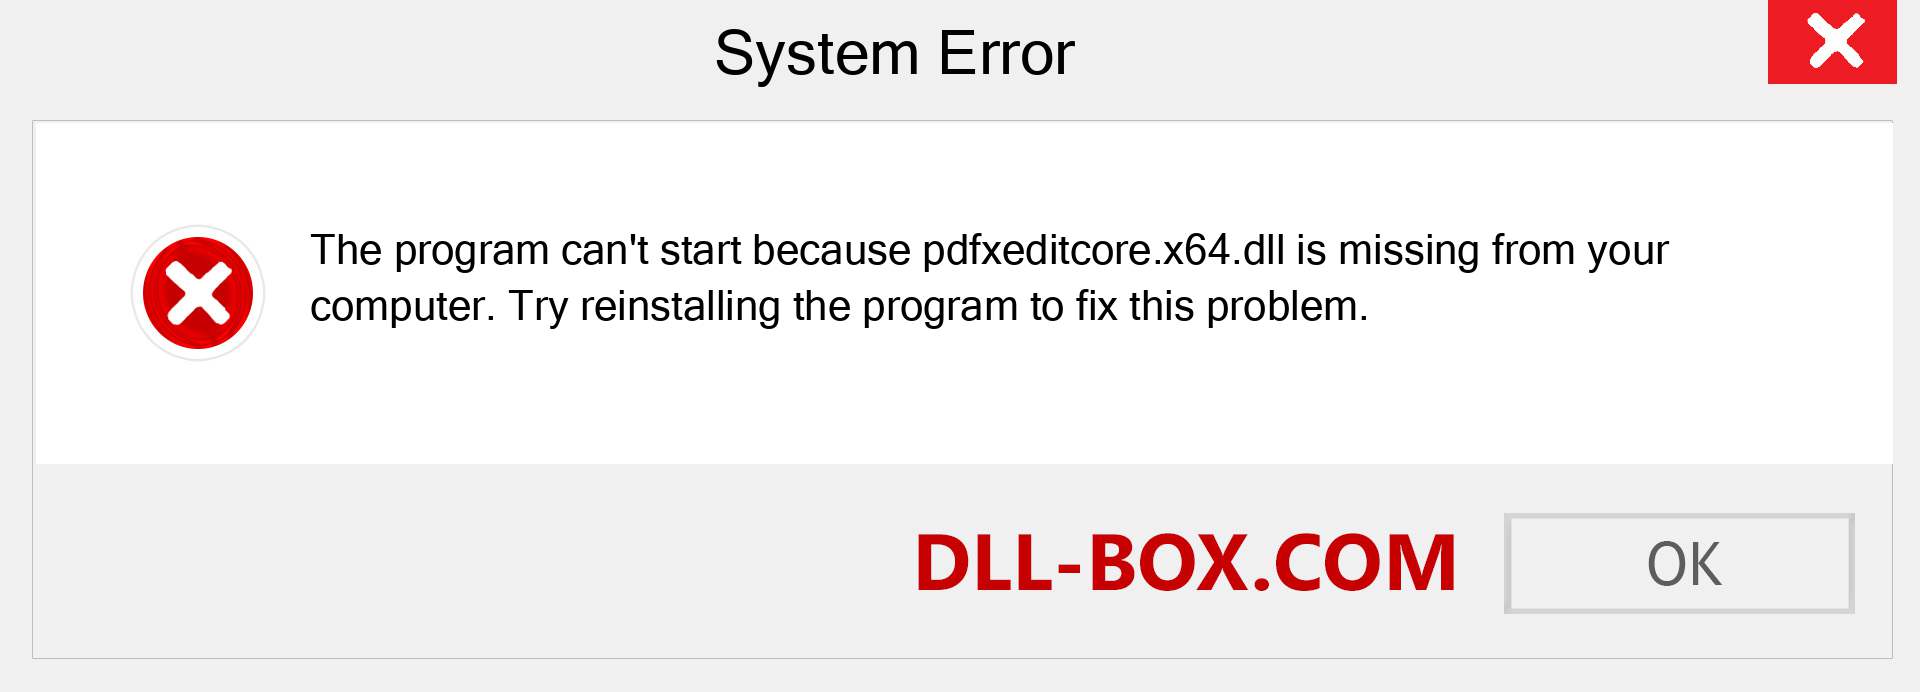  pdfxeditcore.x64.dll file is missing?. Download for Windows 7, 8, 10 - Fix  pdfxeditcore.x64 dll Missing Error on Windows, photos, images